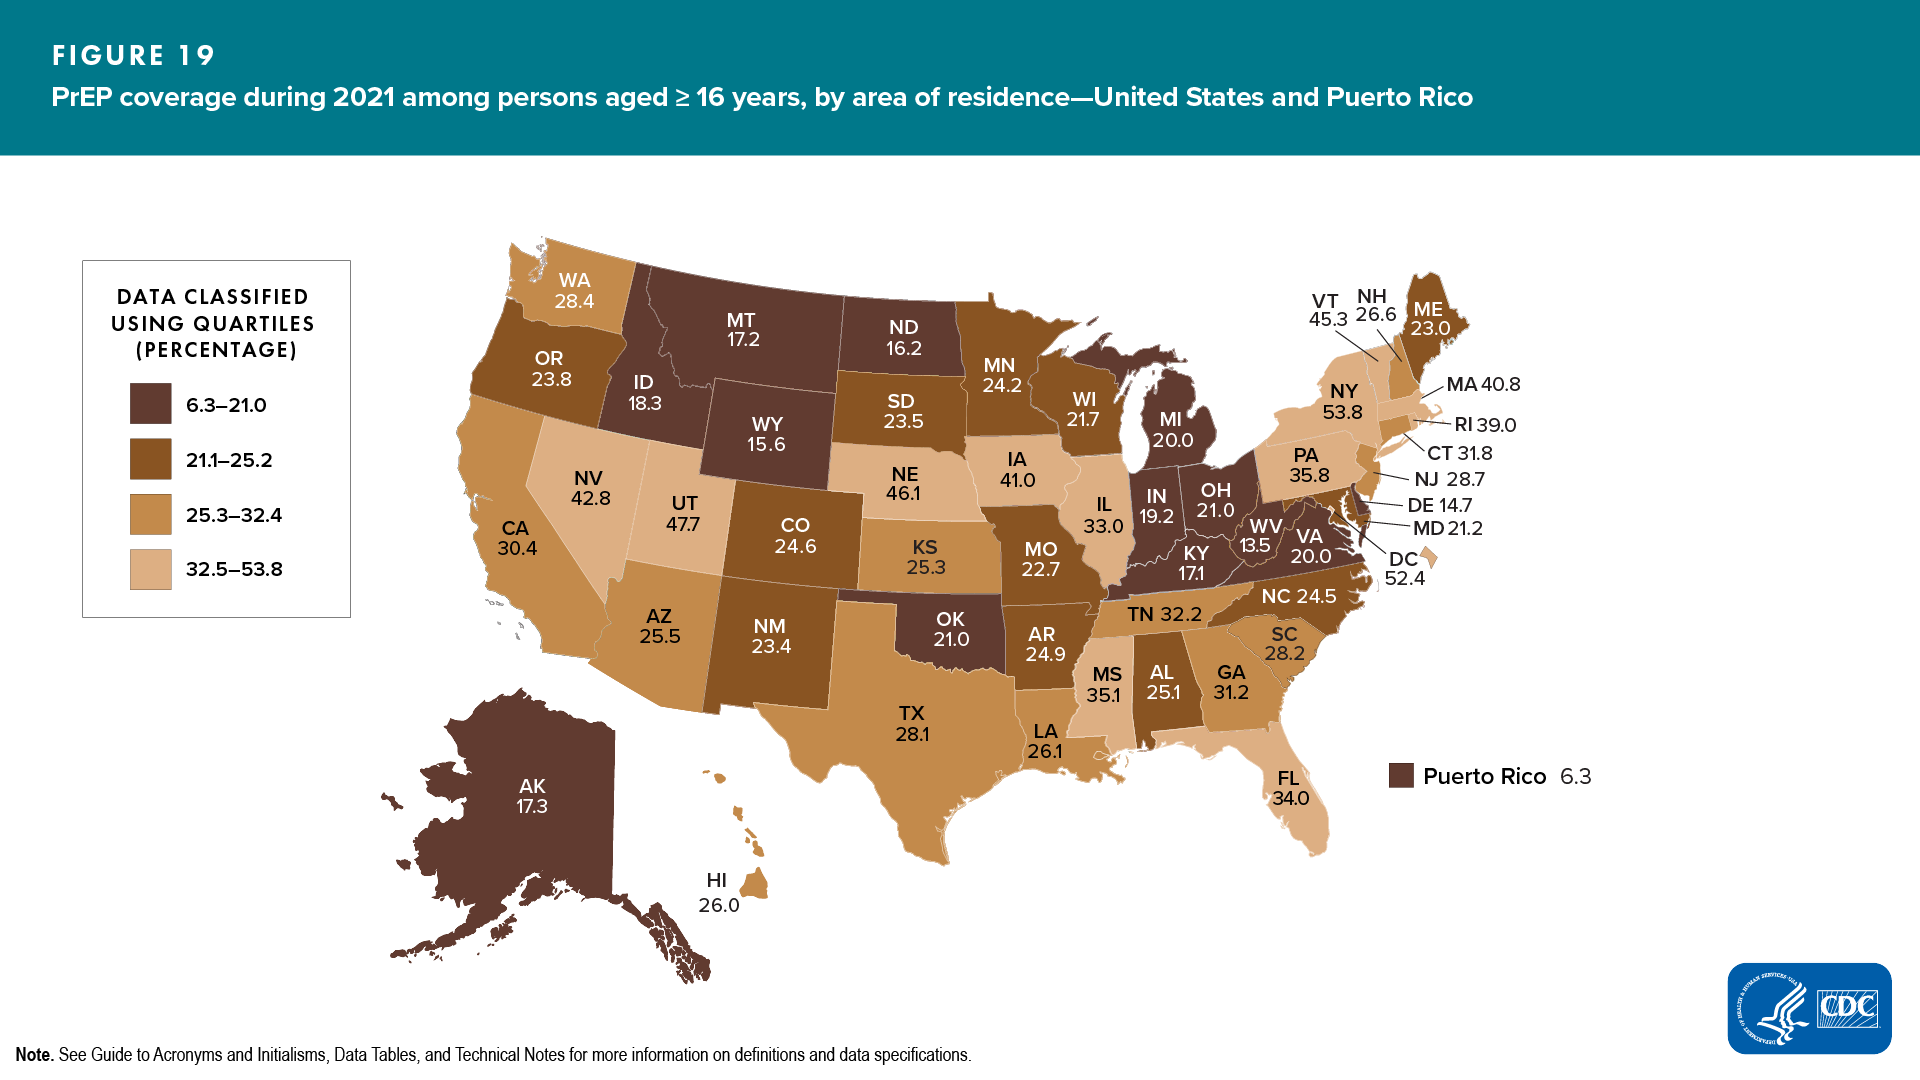 Figure 19. PrEP coverage during 2021 among persons aged ≥16 years, by area of residence — United States and Puerto Rico